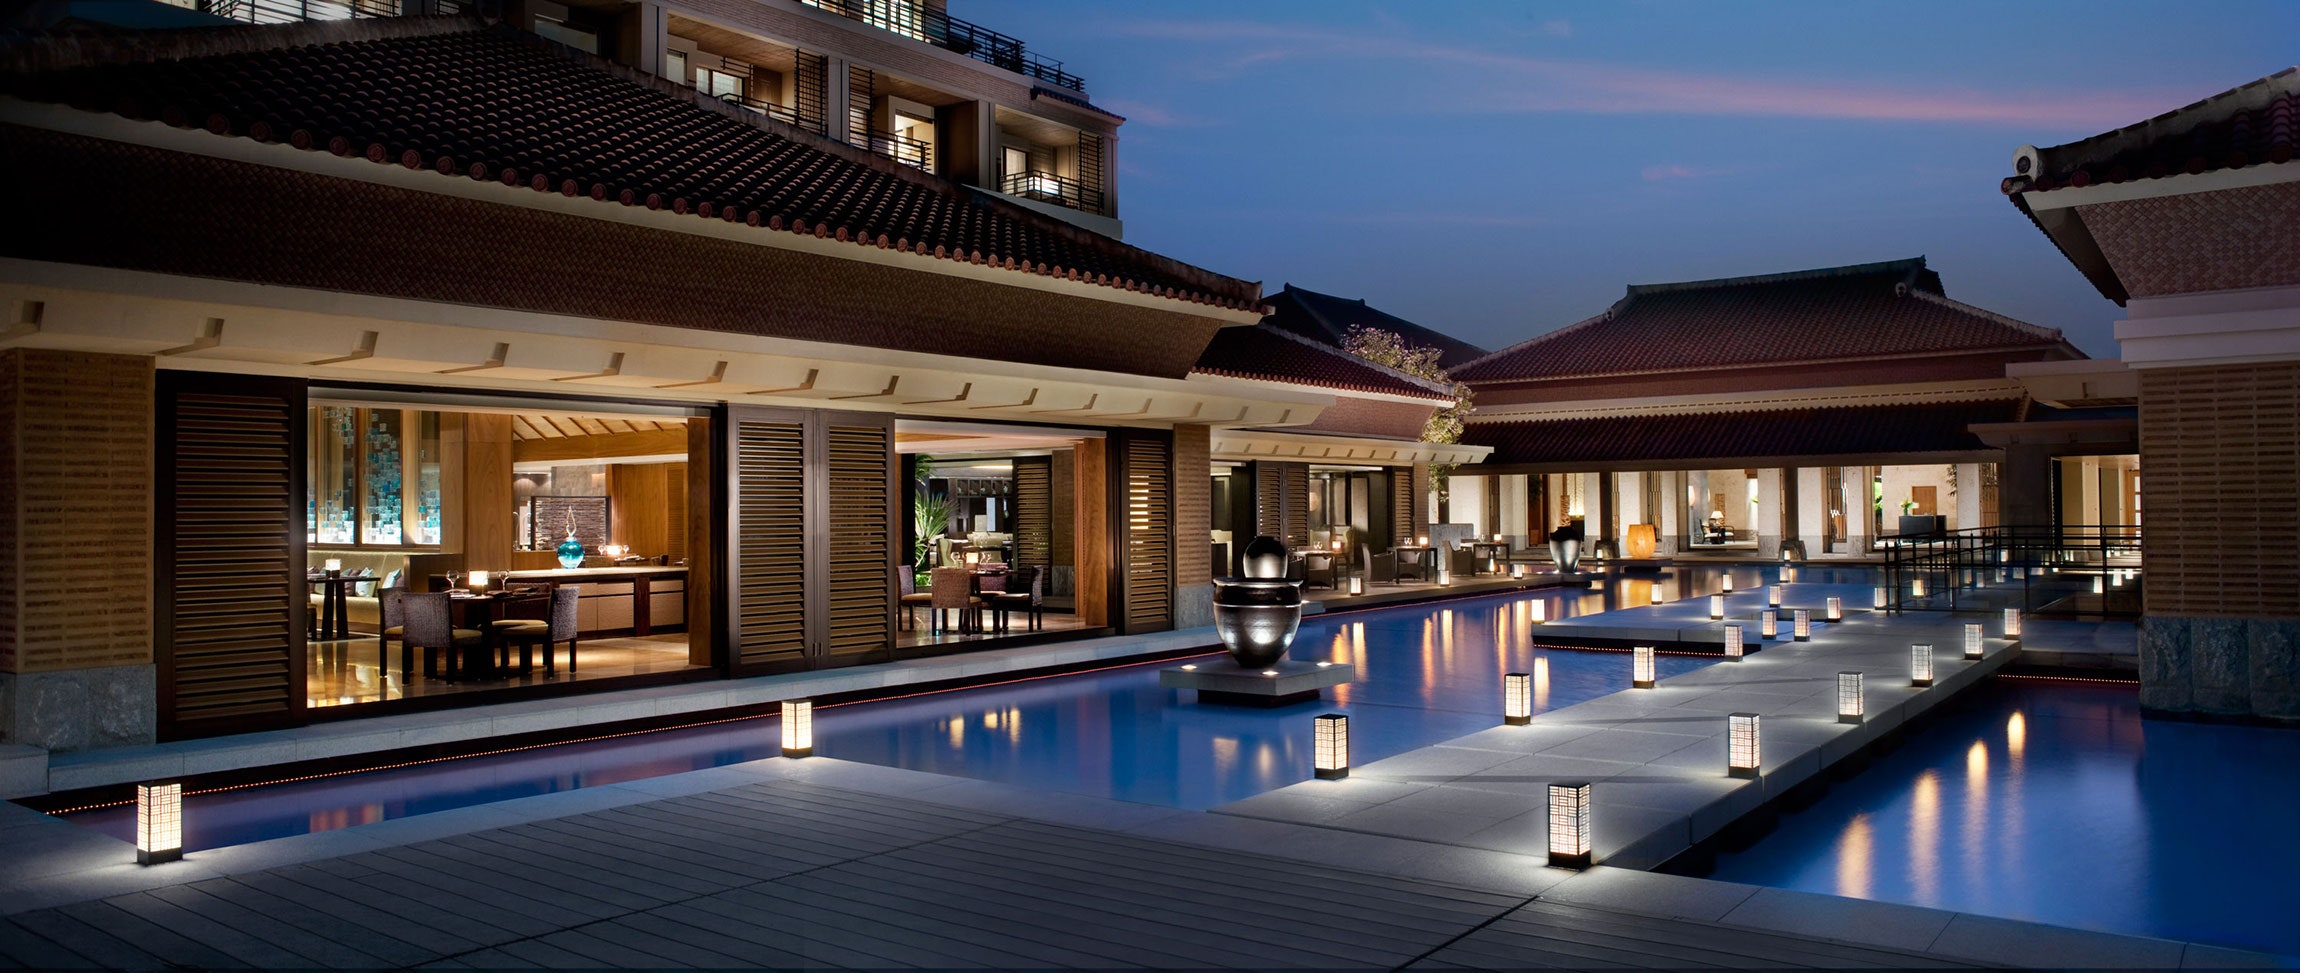 <p>Boasting warm weather year-round and home to some beautiful beaches, Okinawa could be considered the Hawaii of Japan. The stunning <a href="https://www.ritzcarlton.com/en/hotels/okarz-the-ritz-carlton-okinawa/rooms/">Ritz-Carlton</a> is surrounded by an 18-hole golf course and overlooks Nago Bay, and all rooms have a terrace with a scenic view. Enjoy a different side of Japan on the subtropical island.</p> <p><a href="https://www.booking.com/hotel/jp/the-ritz-carlton-okinawa.html"><em>Book now.</em></a></p><p>Sign up for our newsletter to get the latest in design, decorating, celebrity style, shopping, and more.</p><a href="https://www.architecturaldigest.com/newsletter/subscribe?sourceCode=msnsend">Sign Up Now</a>